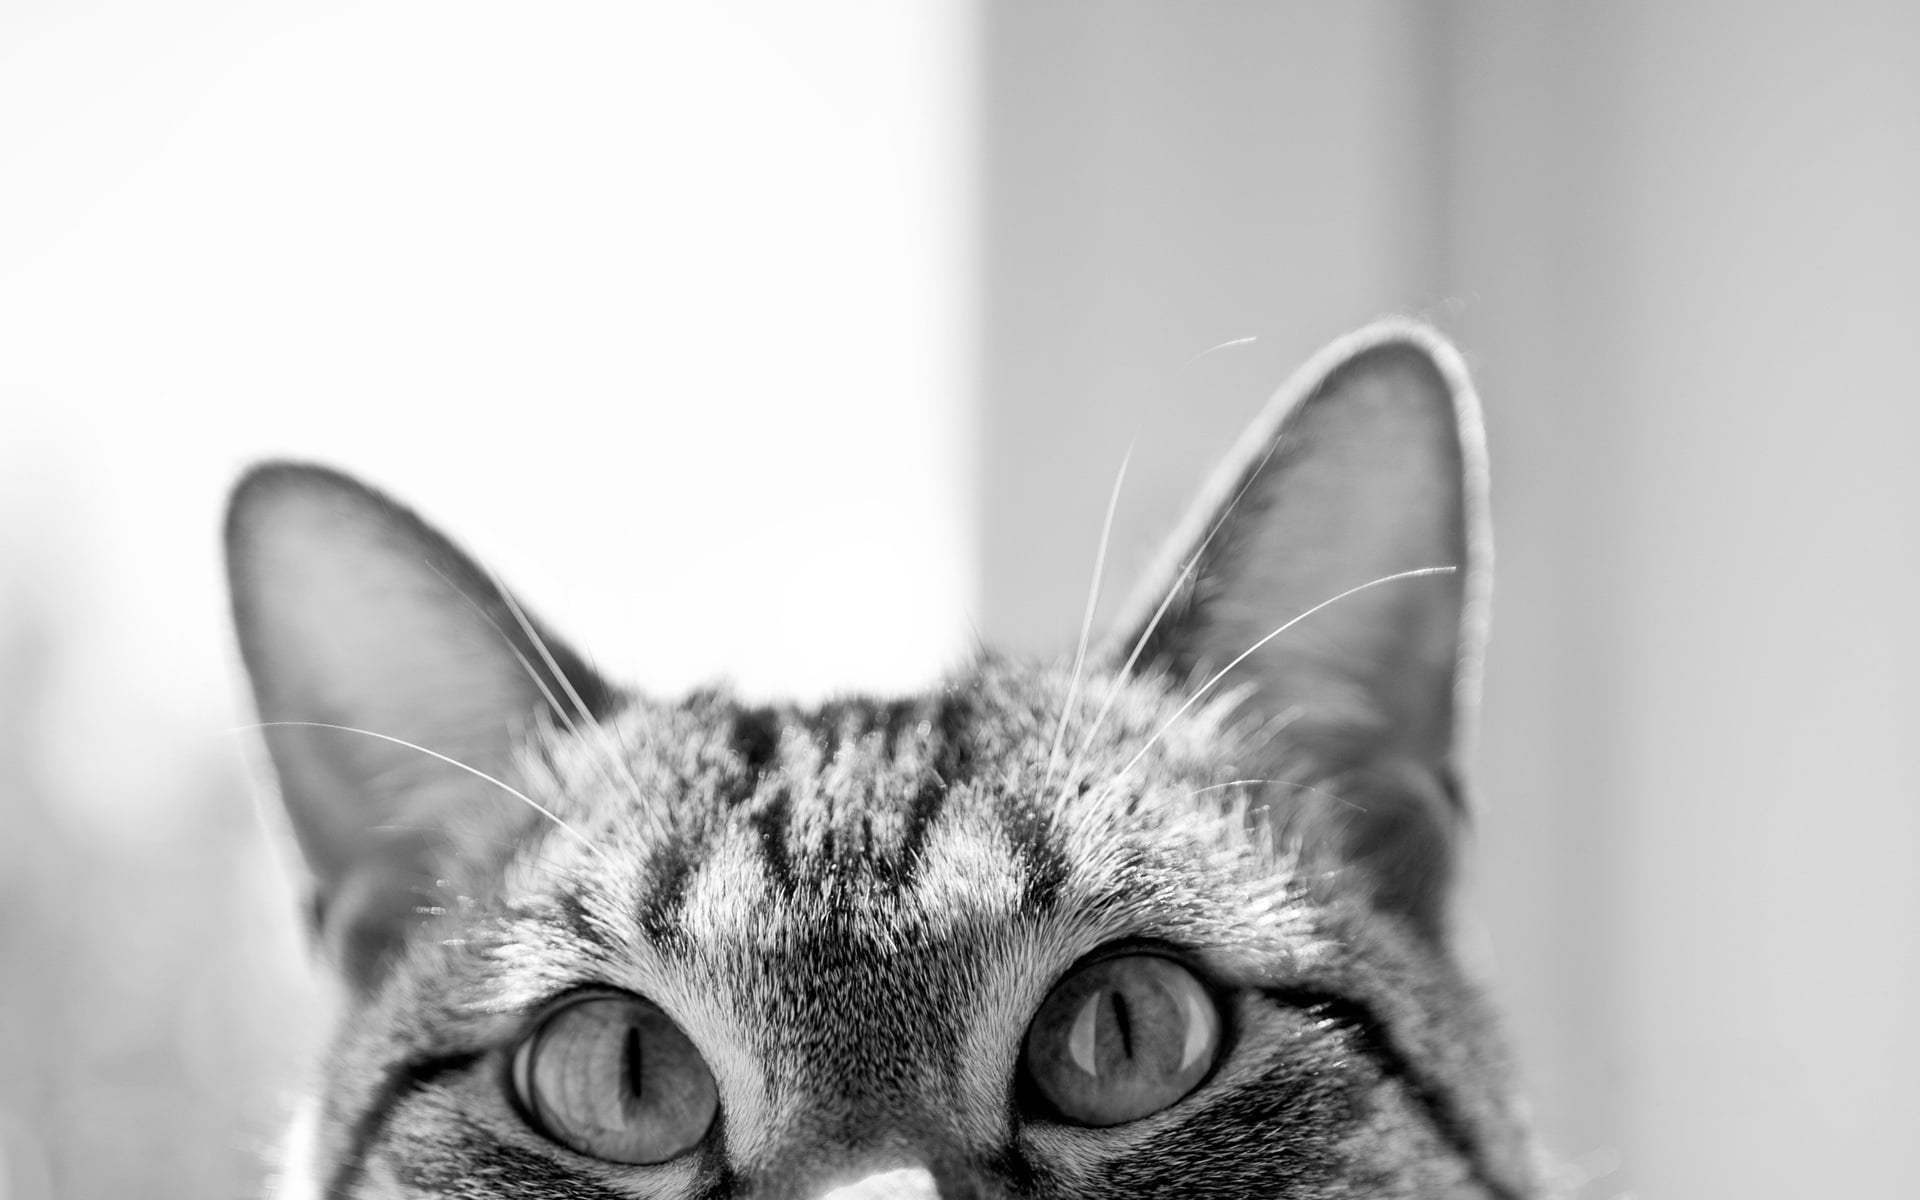 grayscale photo of cat, muzzle, ears, eyes, hide, domestic Cat